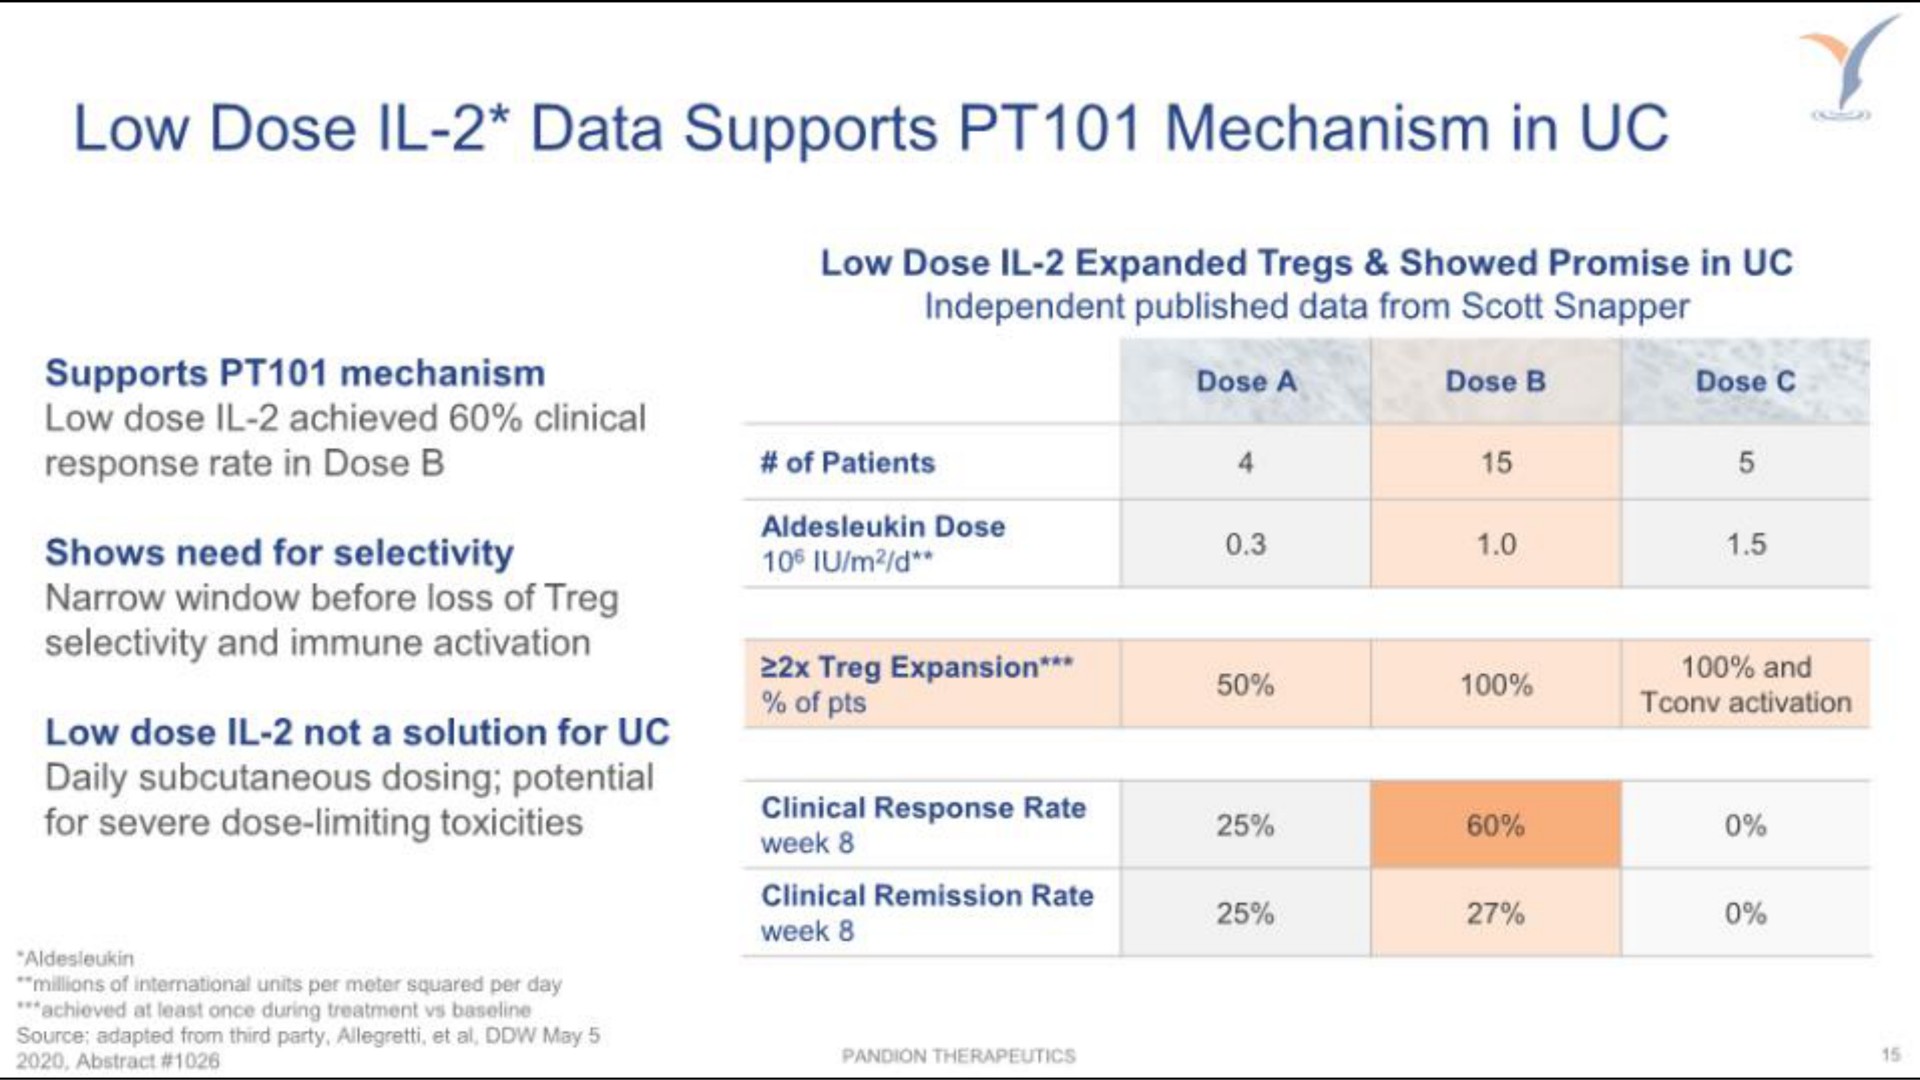 low dose data supports mechanism in | Pandion Therapeutics